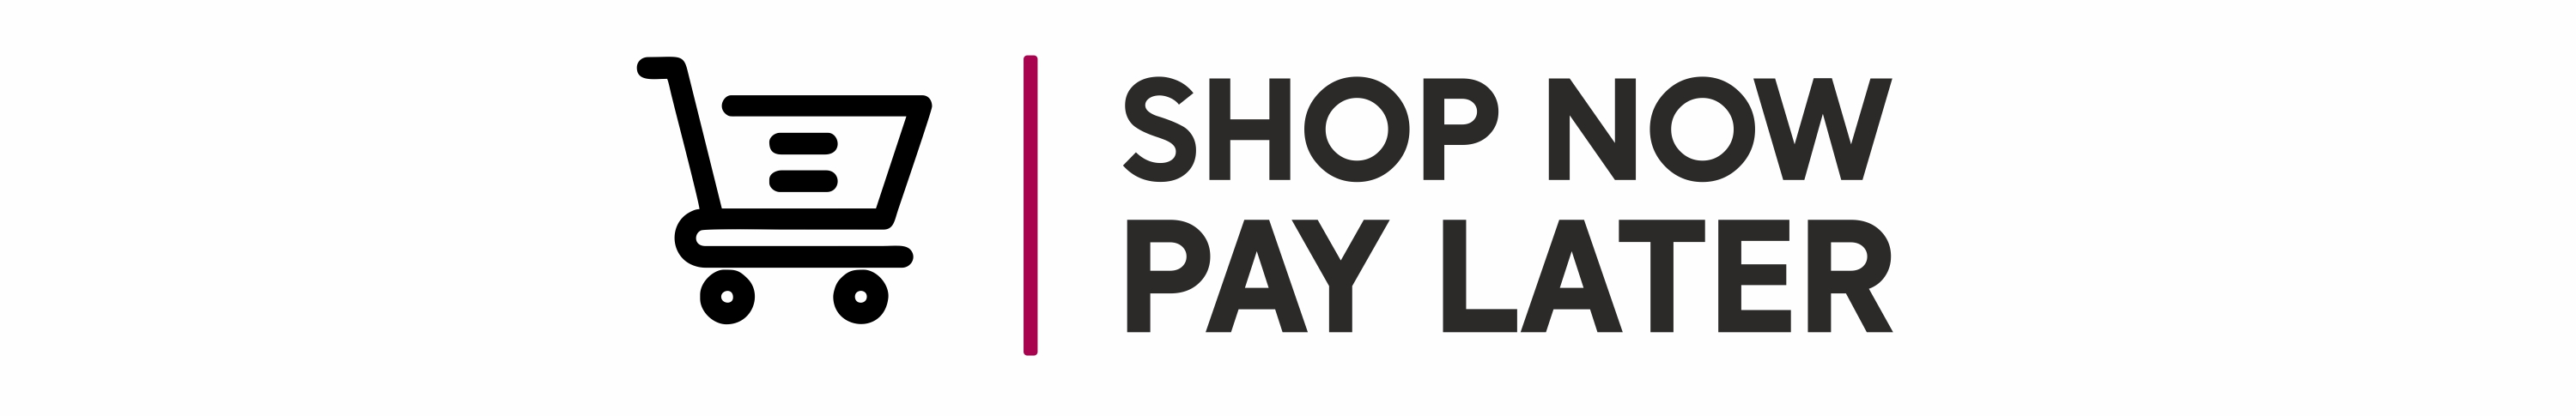 SHOP NOW PAY LATER 